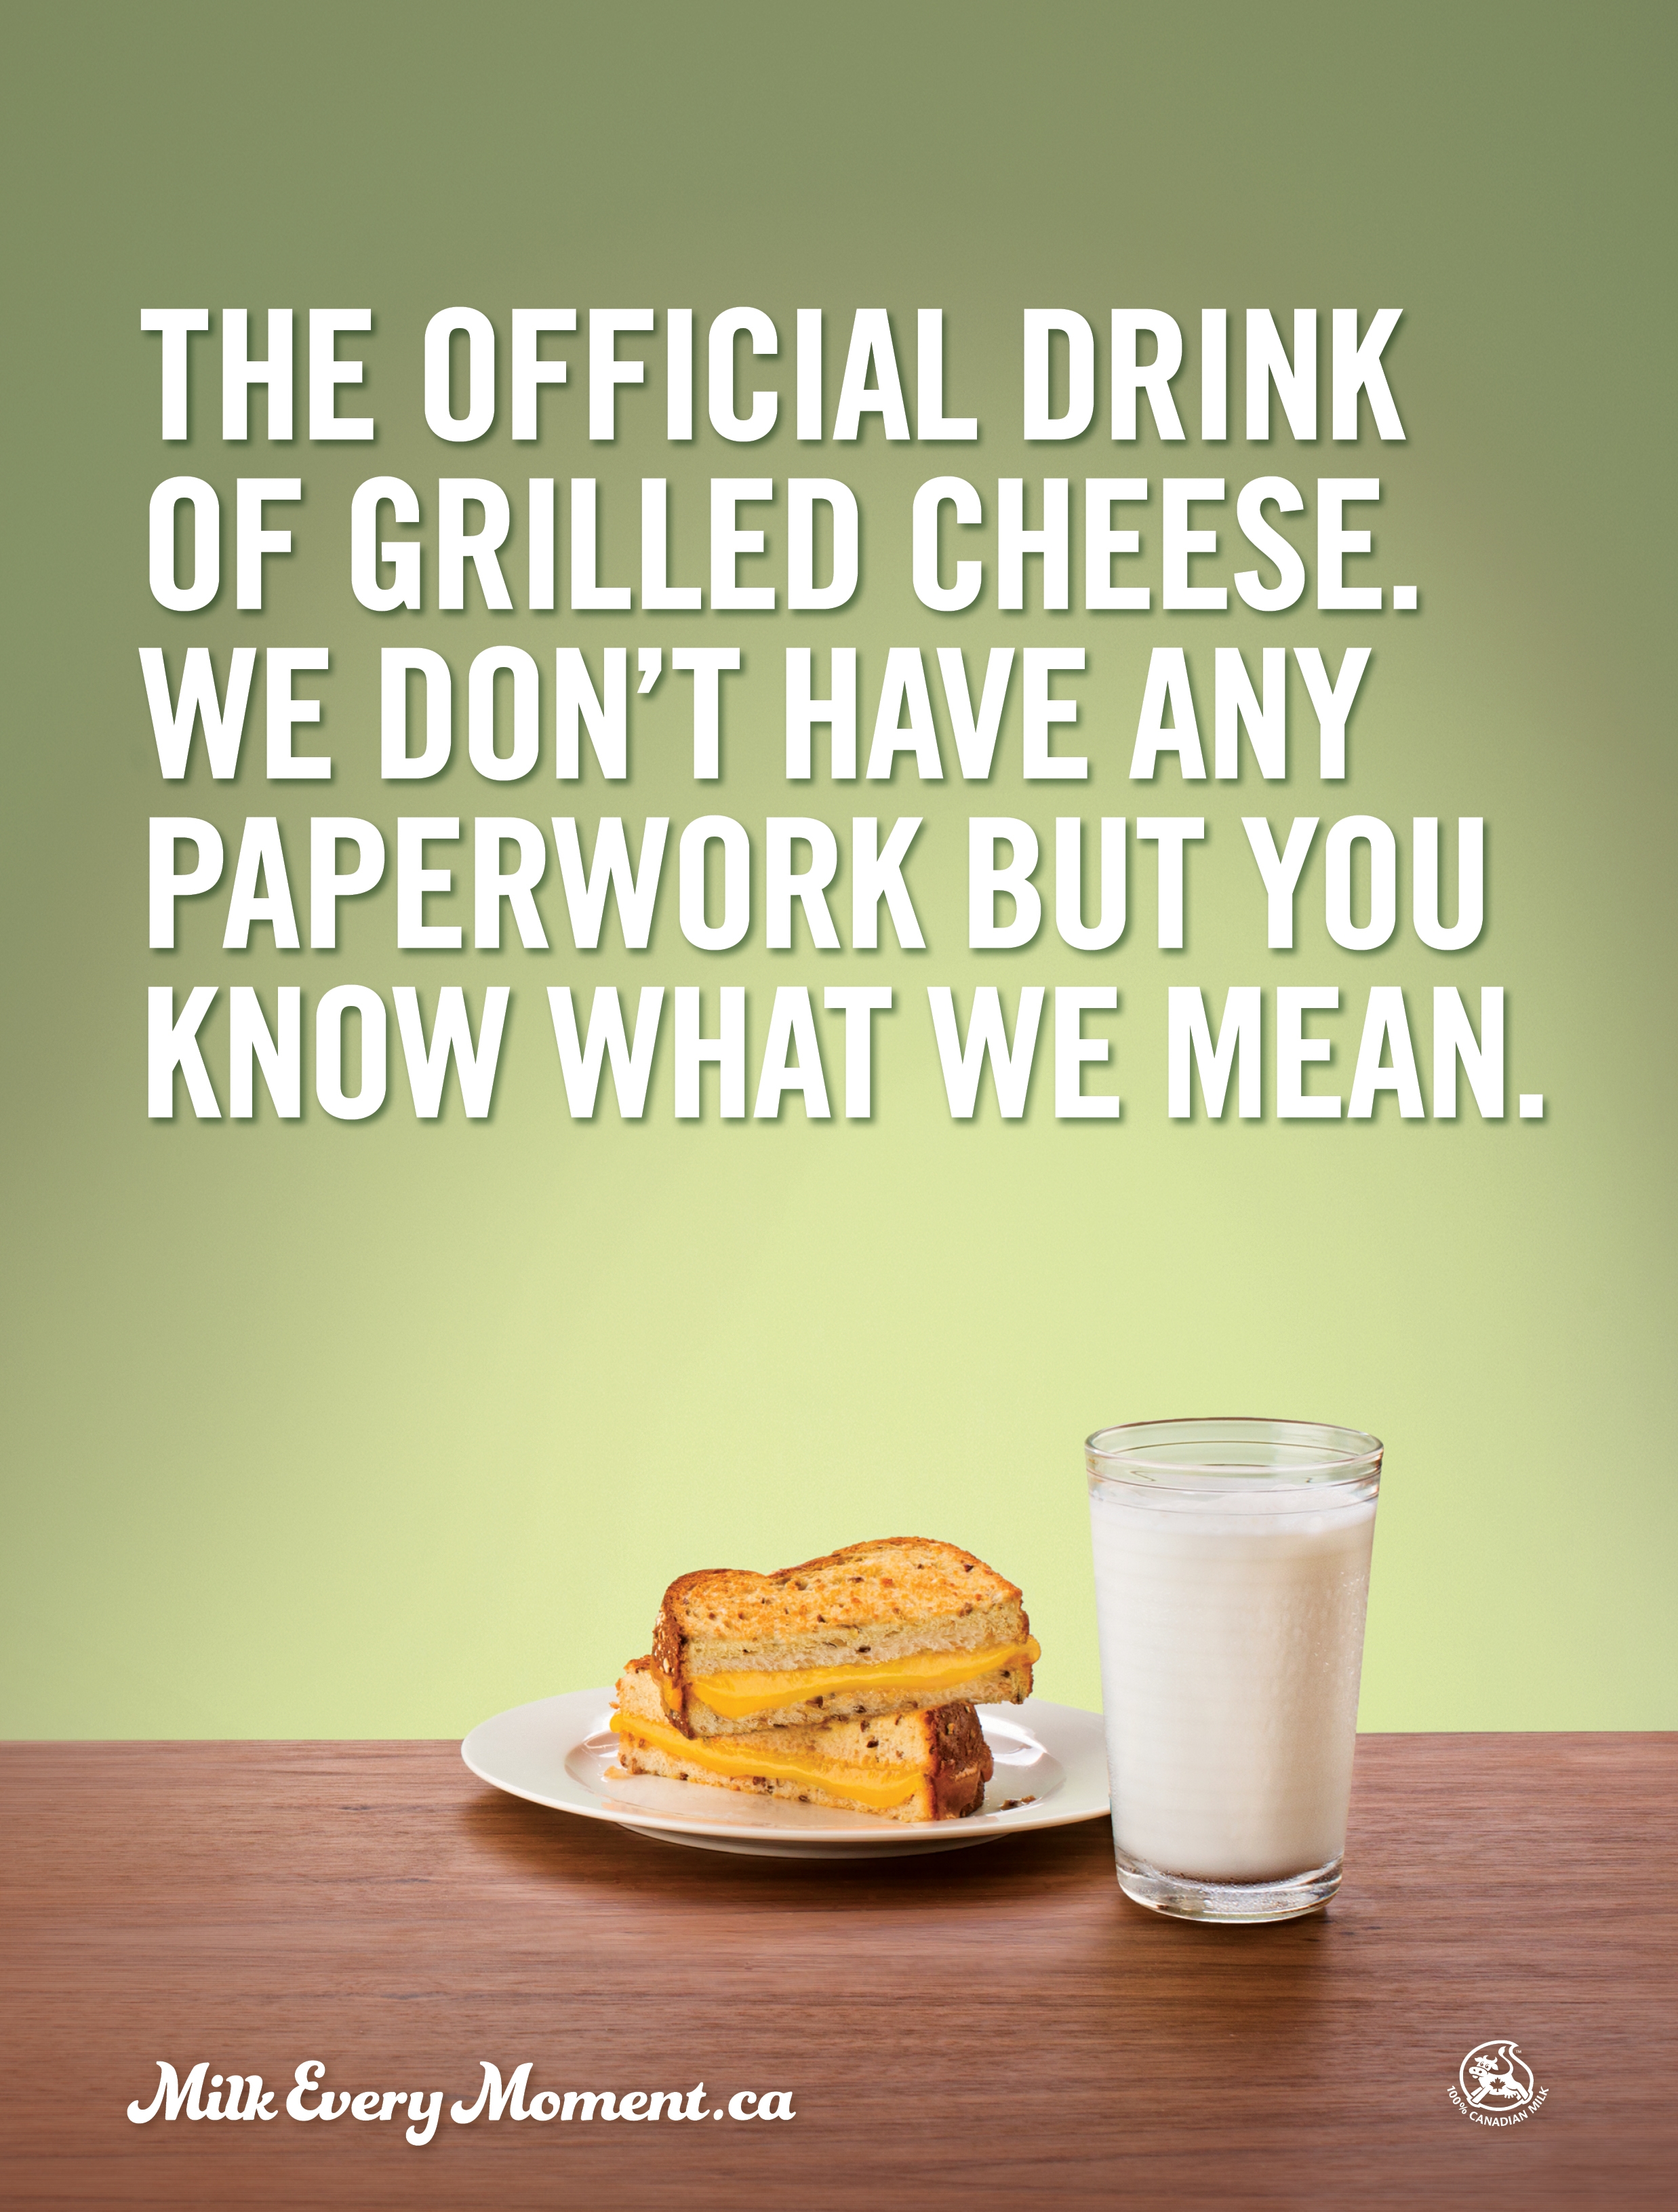 17776_Milk_Every_Moment_Grilled_Cheese_Print_Magazine